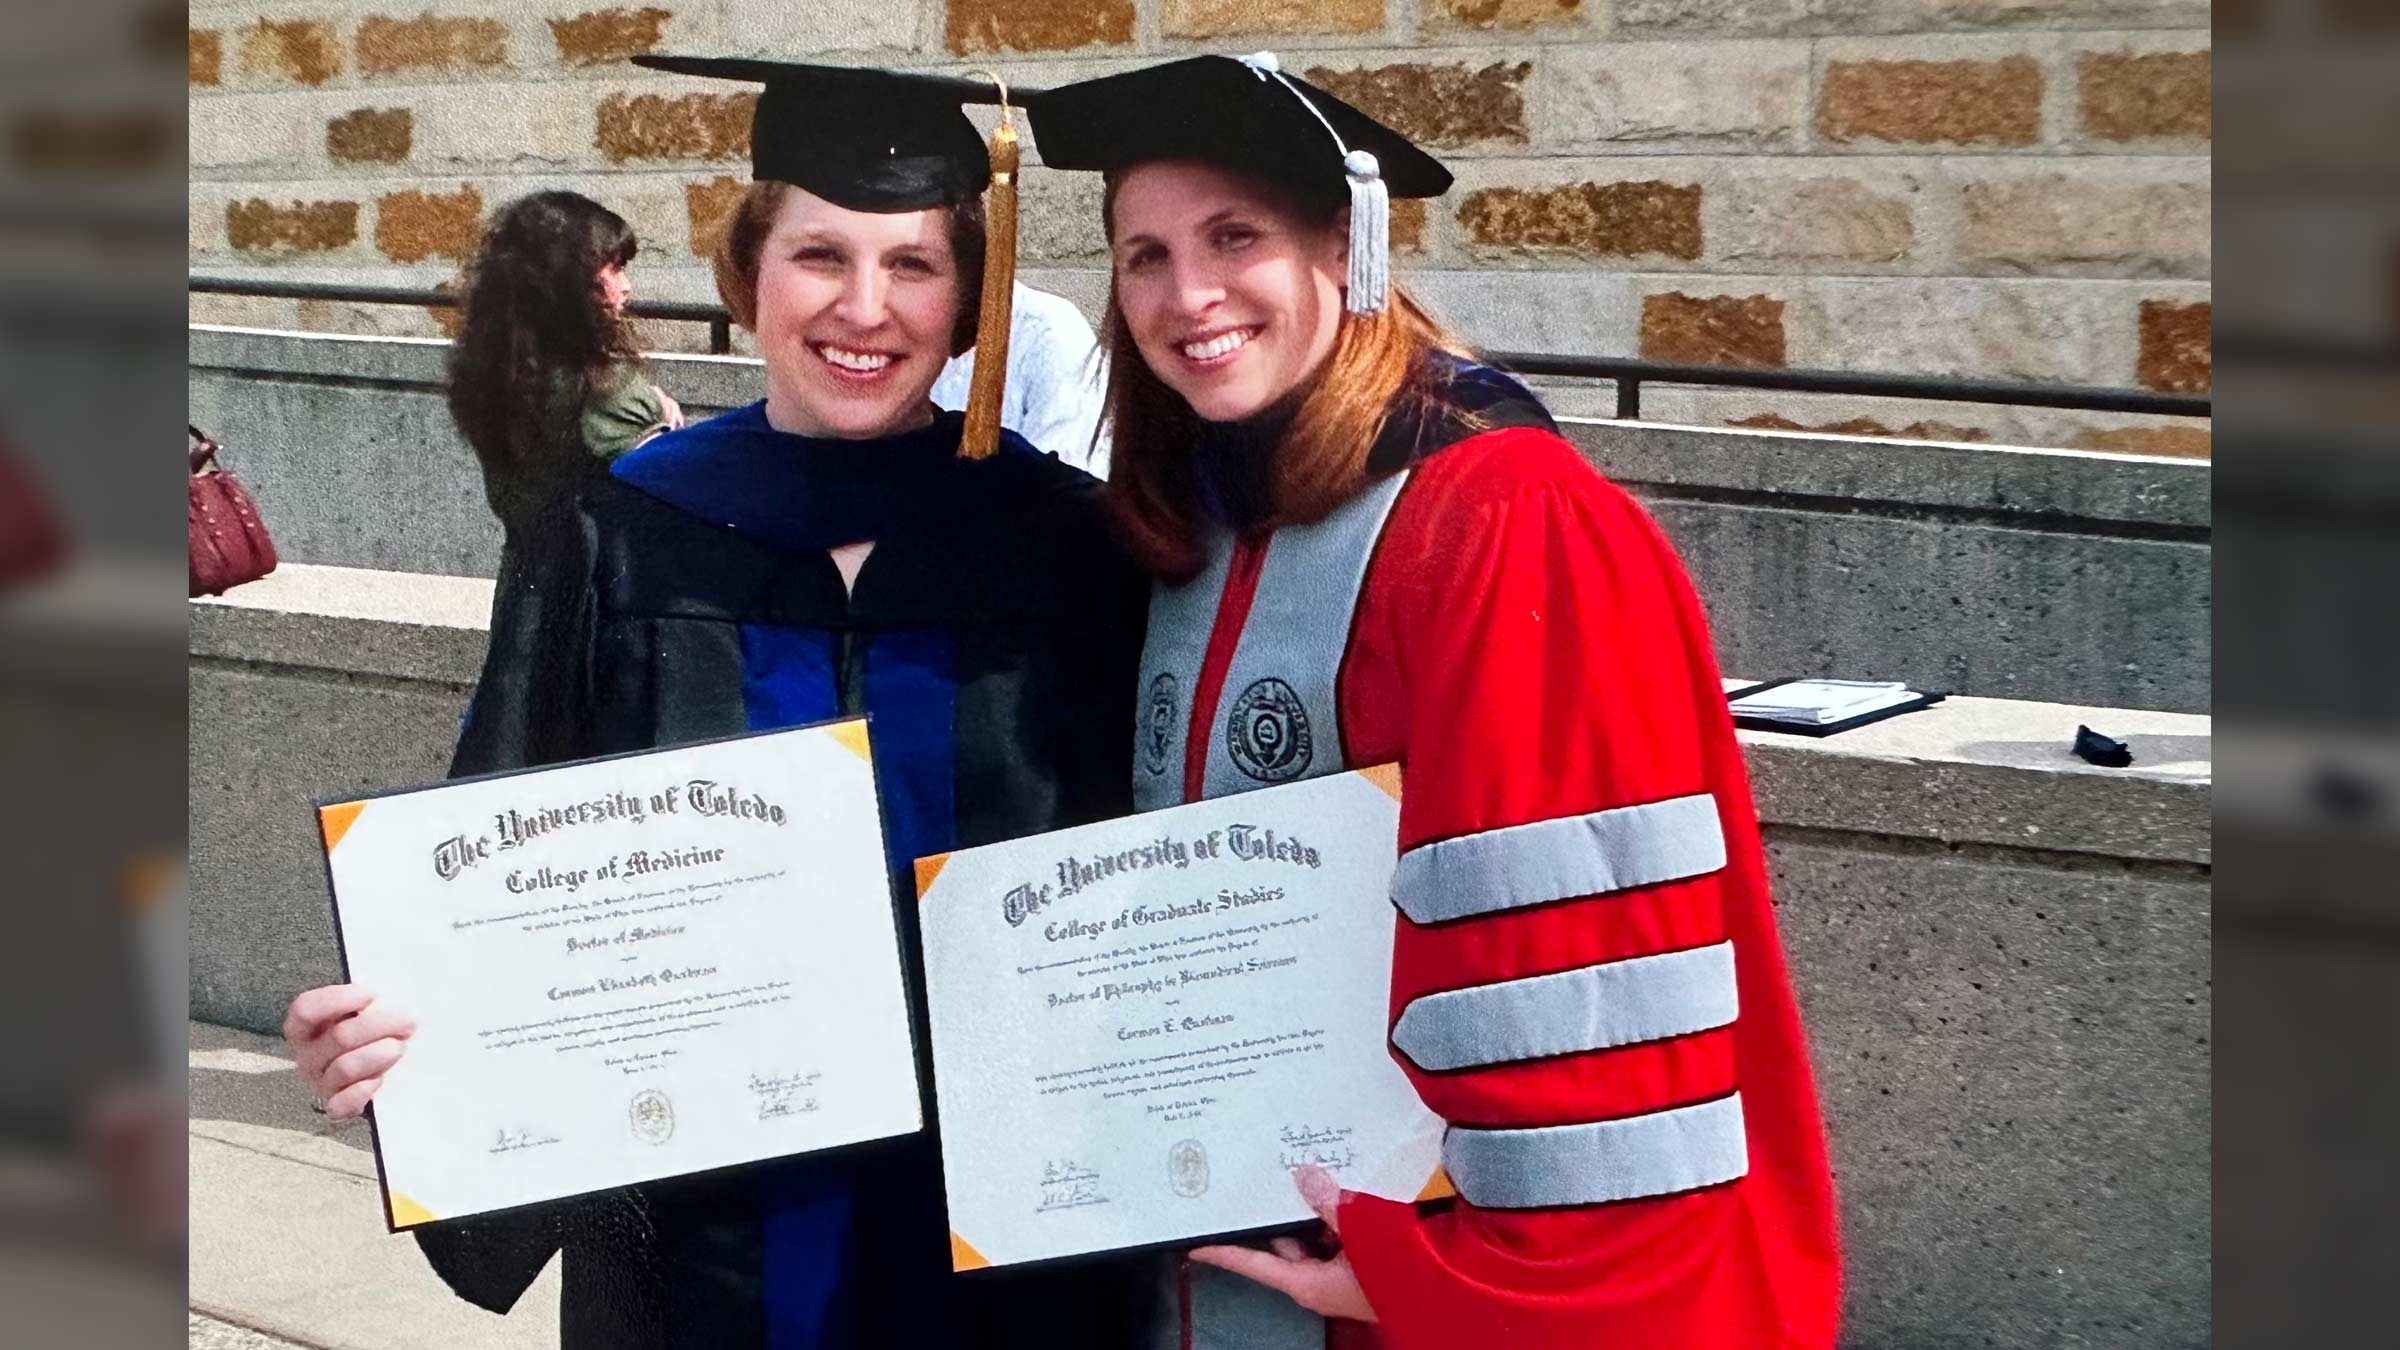 Carmen Quatman, MD, PhD, and her twin sister, Catherine “Katie” Quatman-Yates, DPT, PhD, earned doctorate degrees together at the University of Toledo.